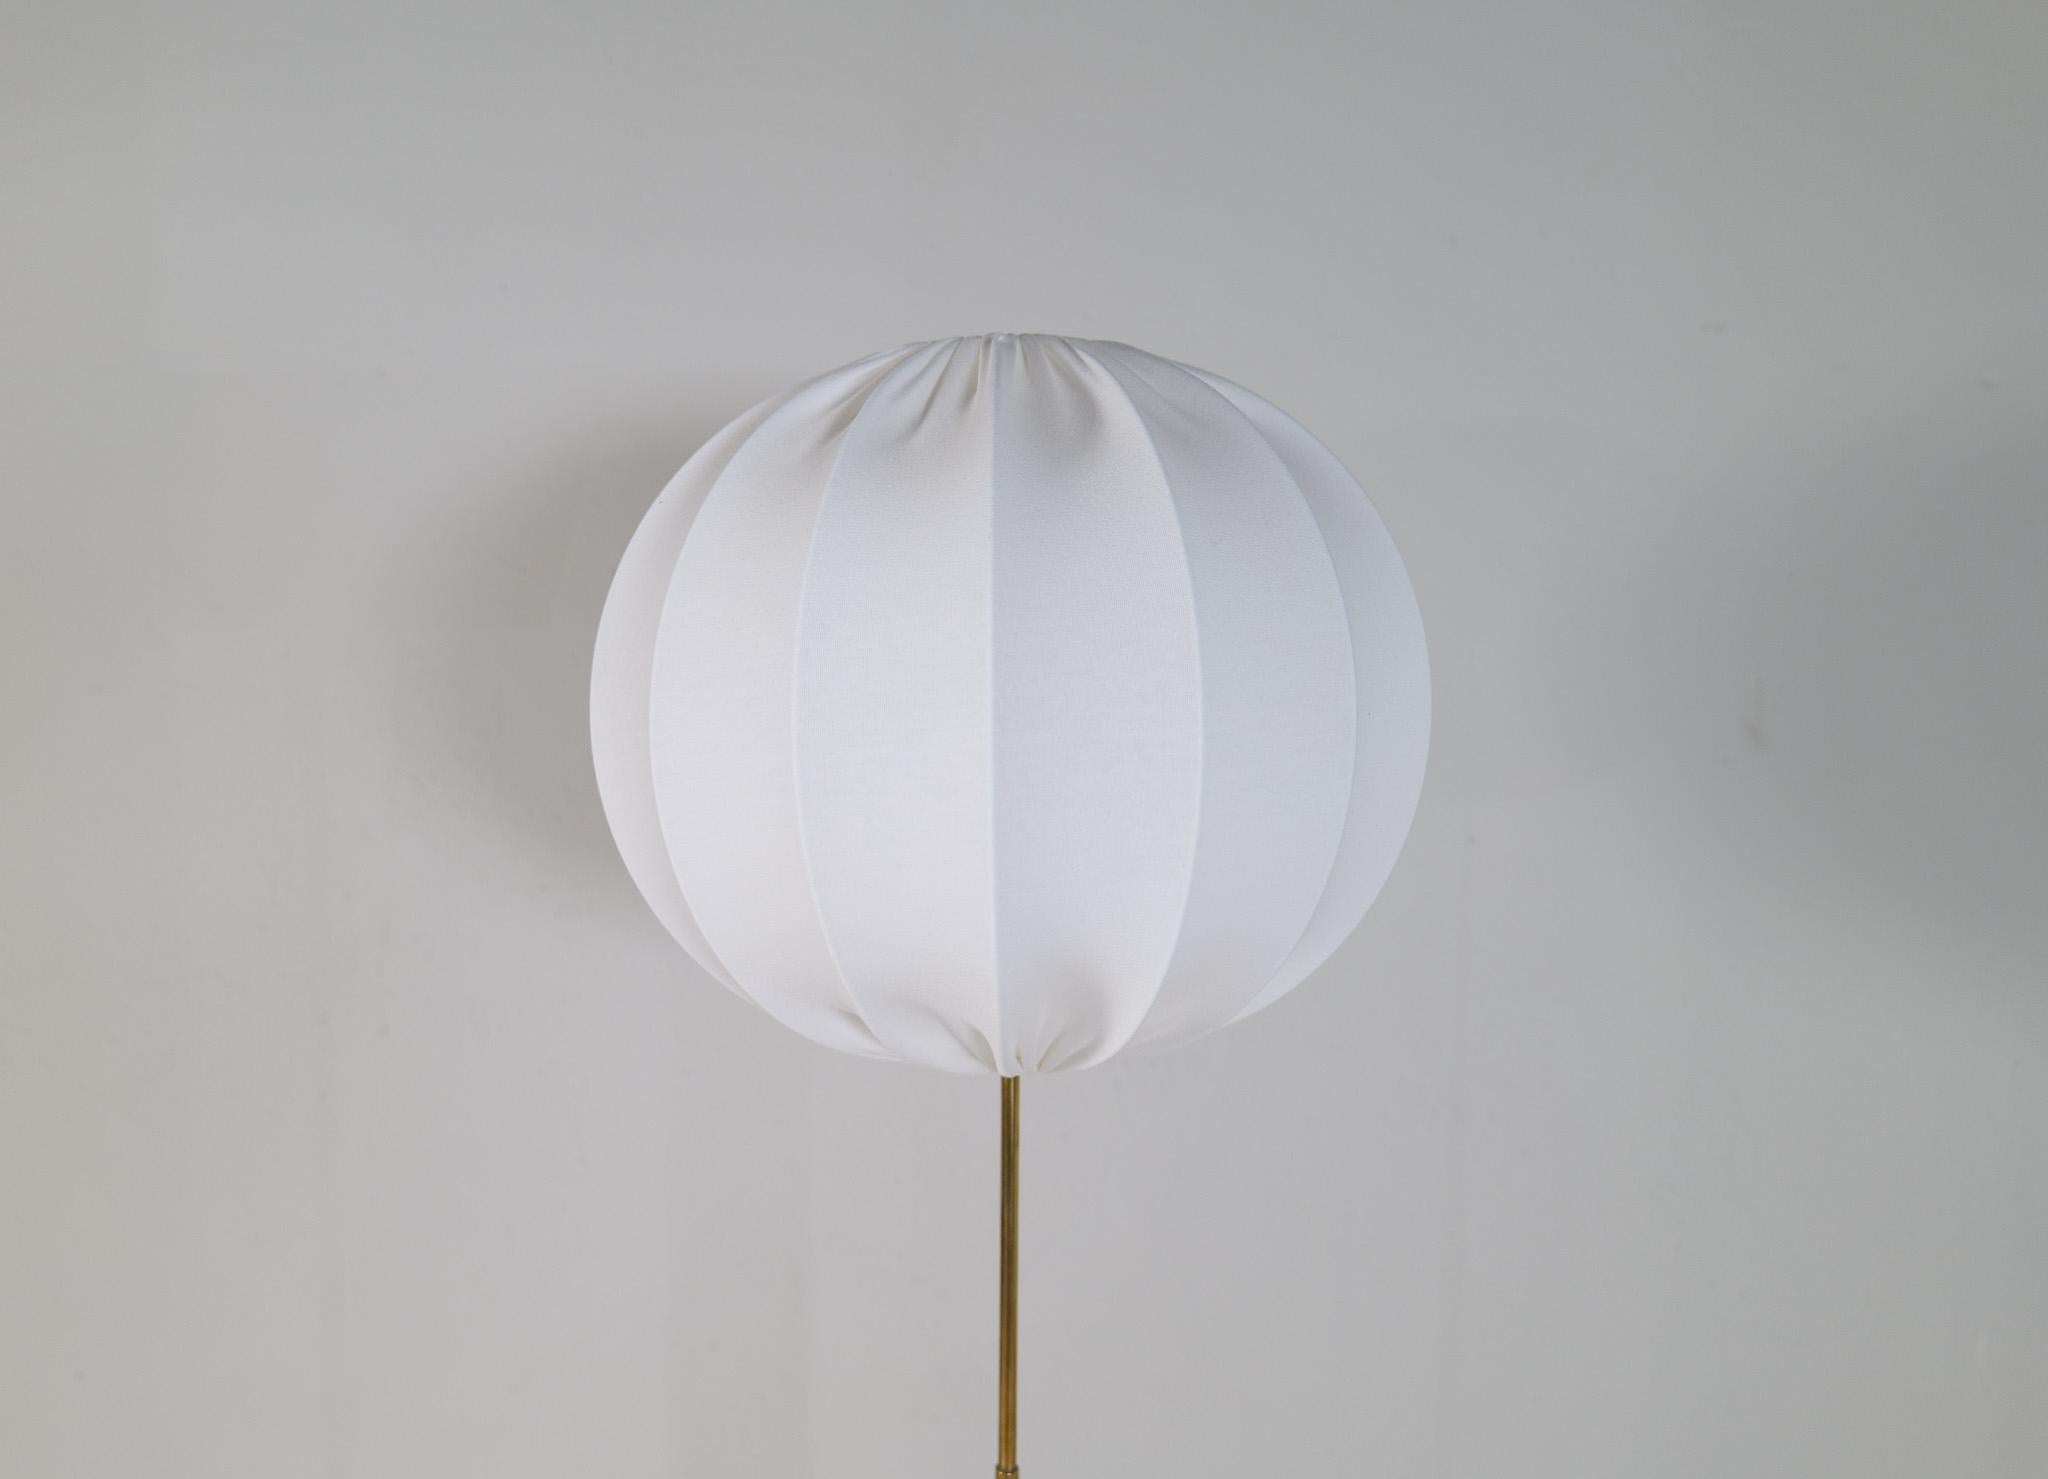 Midcentury Modern ASEA Brass Floor Lamp with Round Cotton Shade, Sweden, 1960s For Sale 1